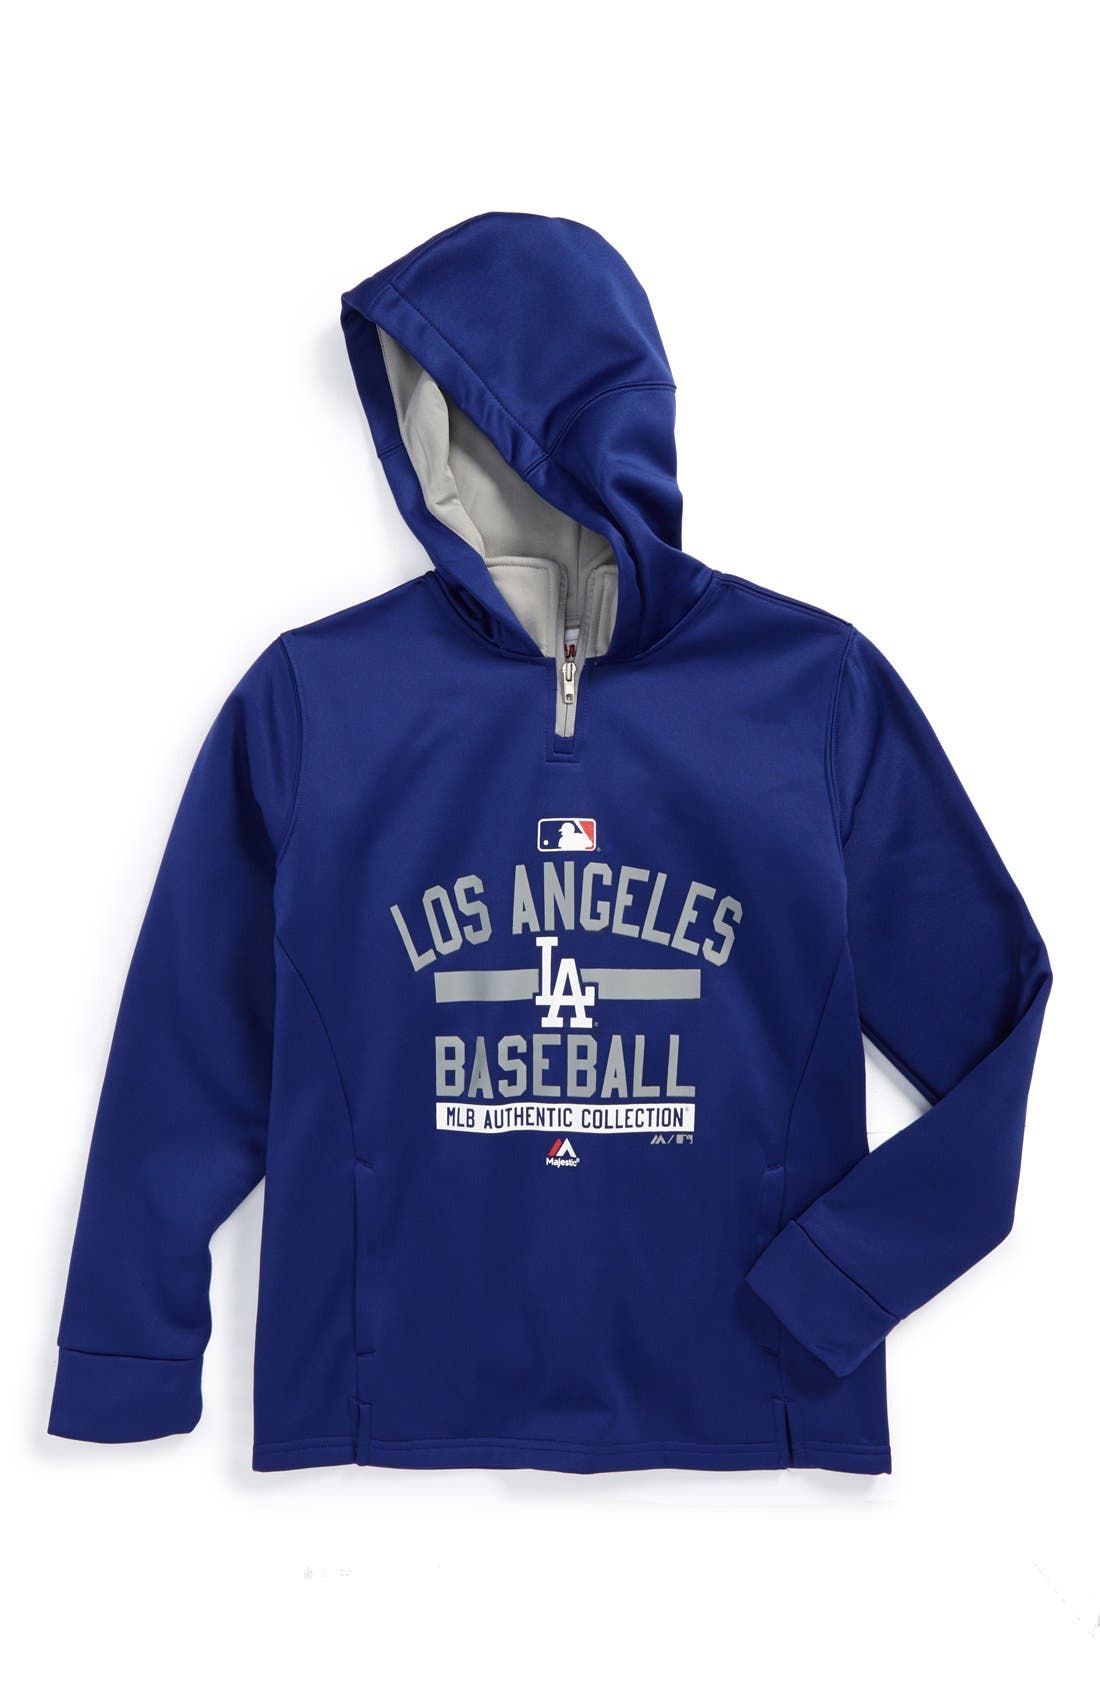 mlb authentic collection hoodie